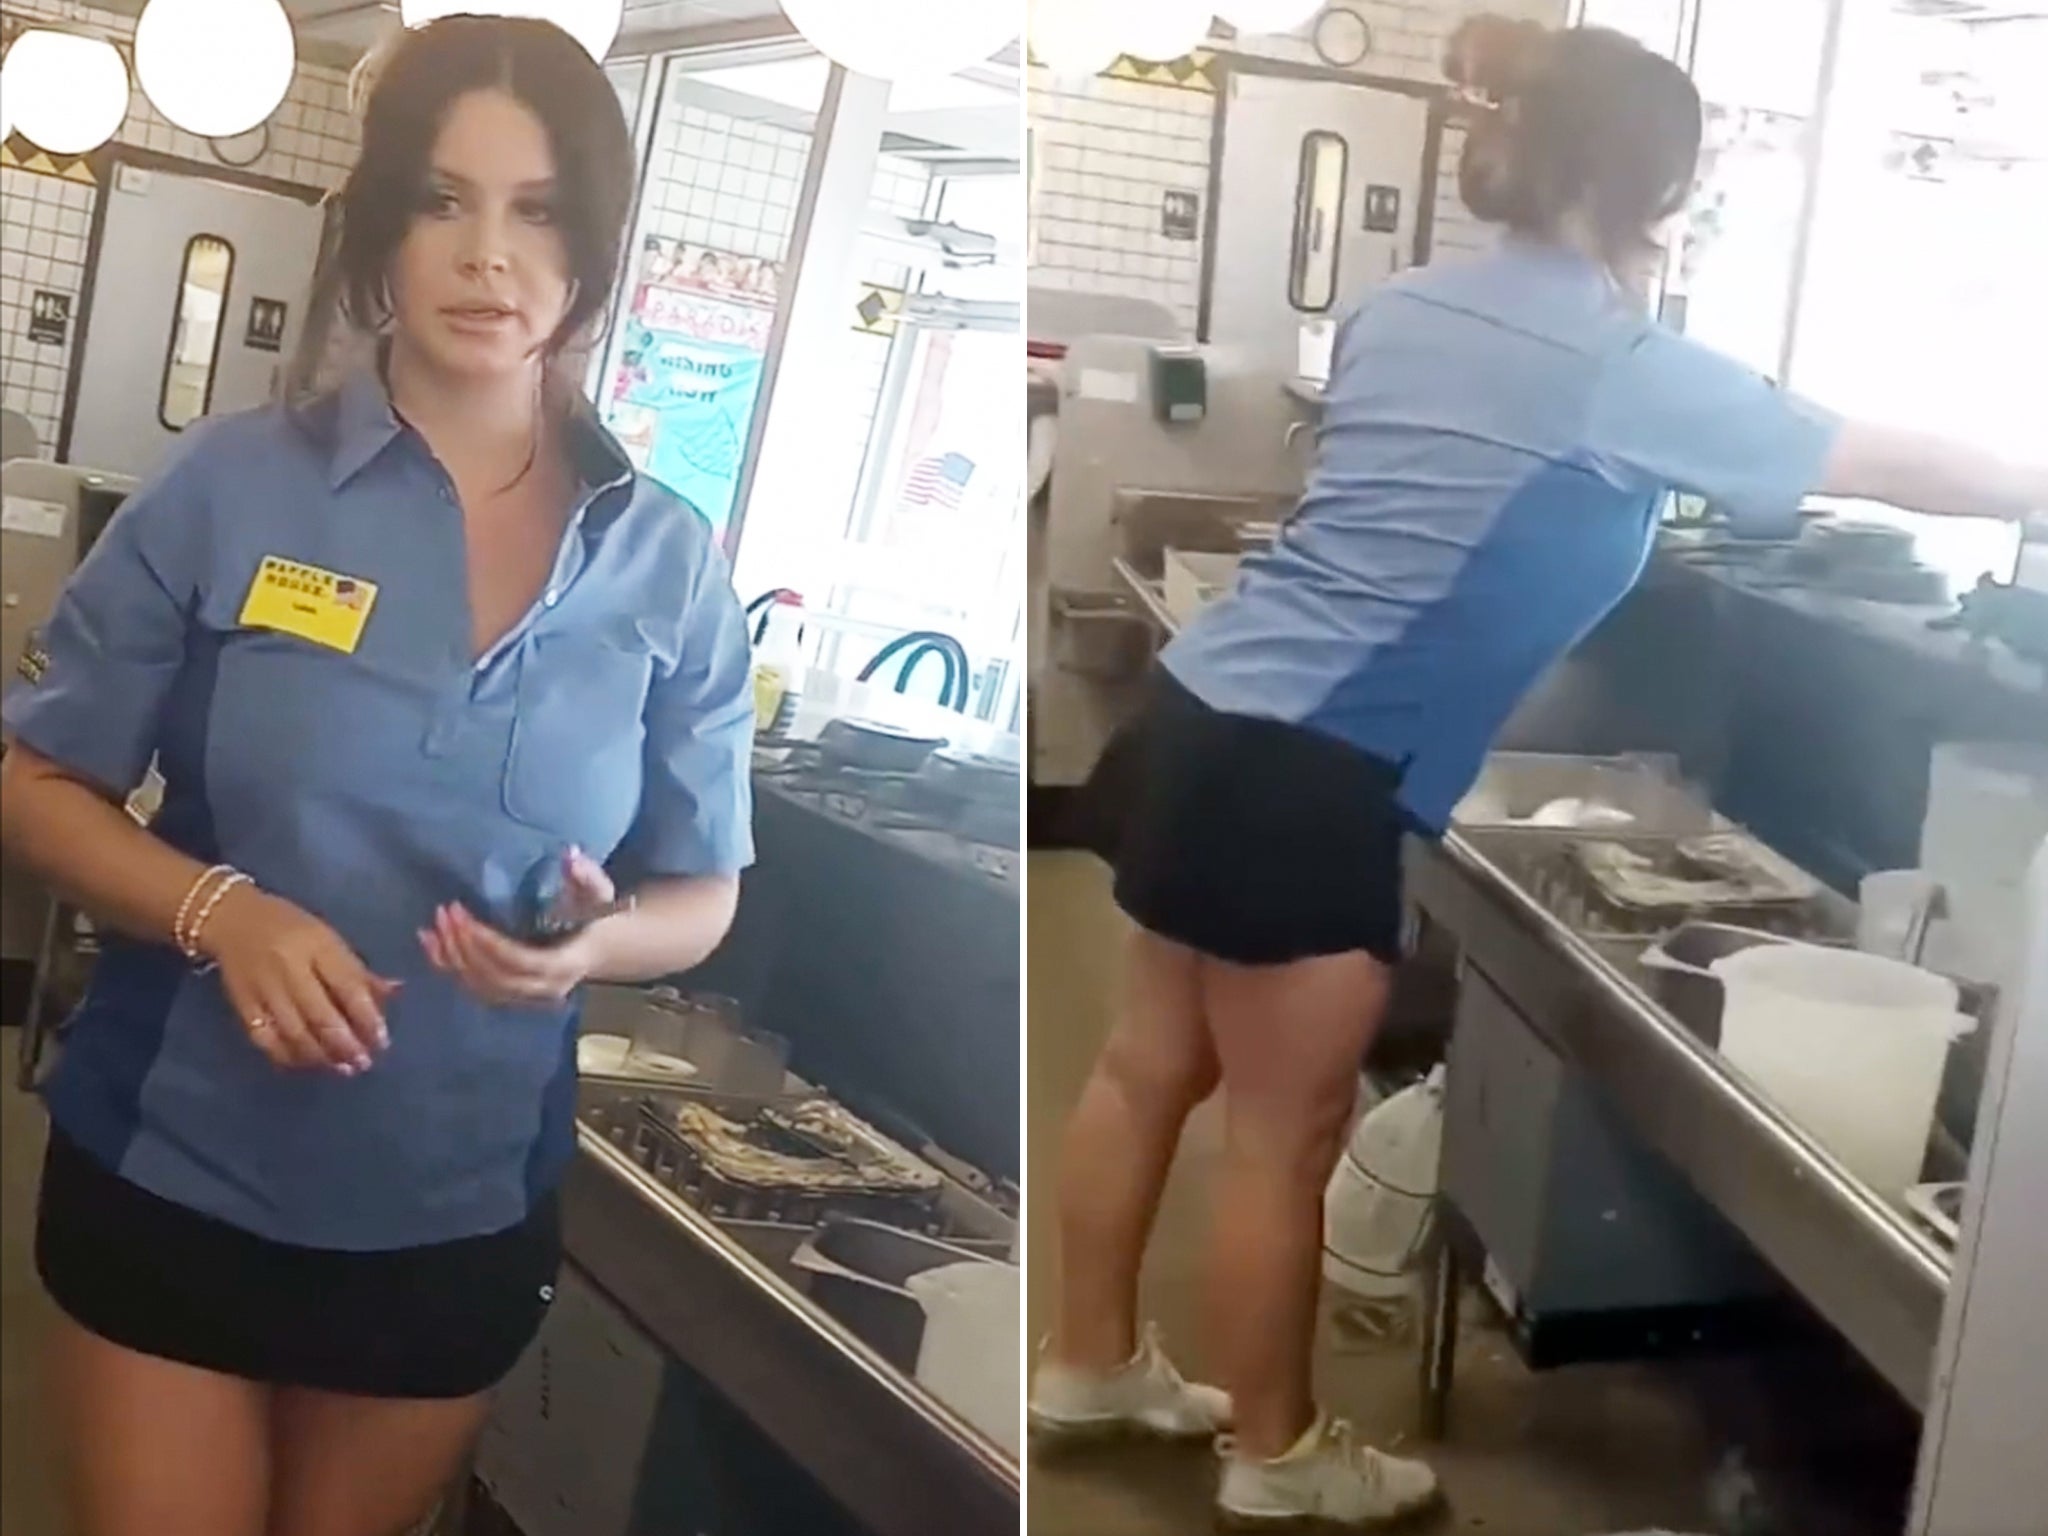 Del Rey working as a Waffle House waitress